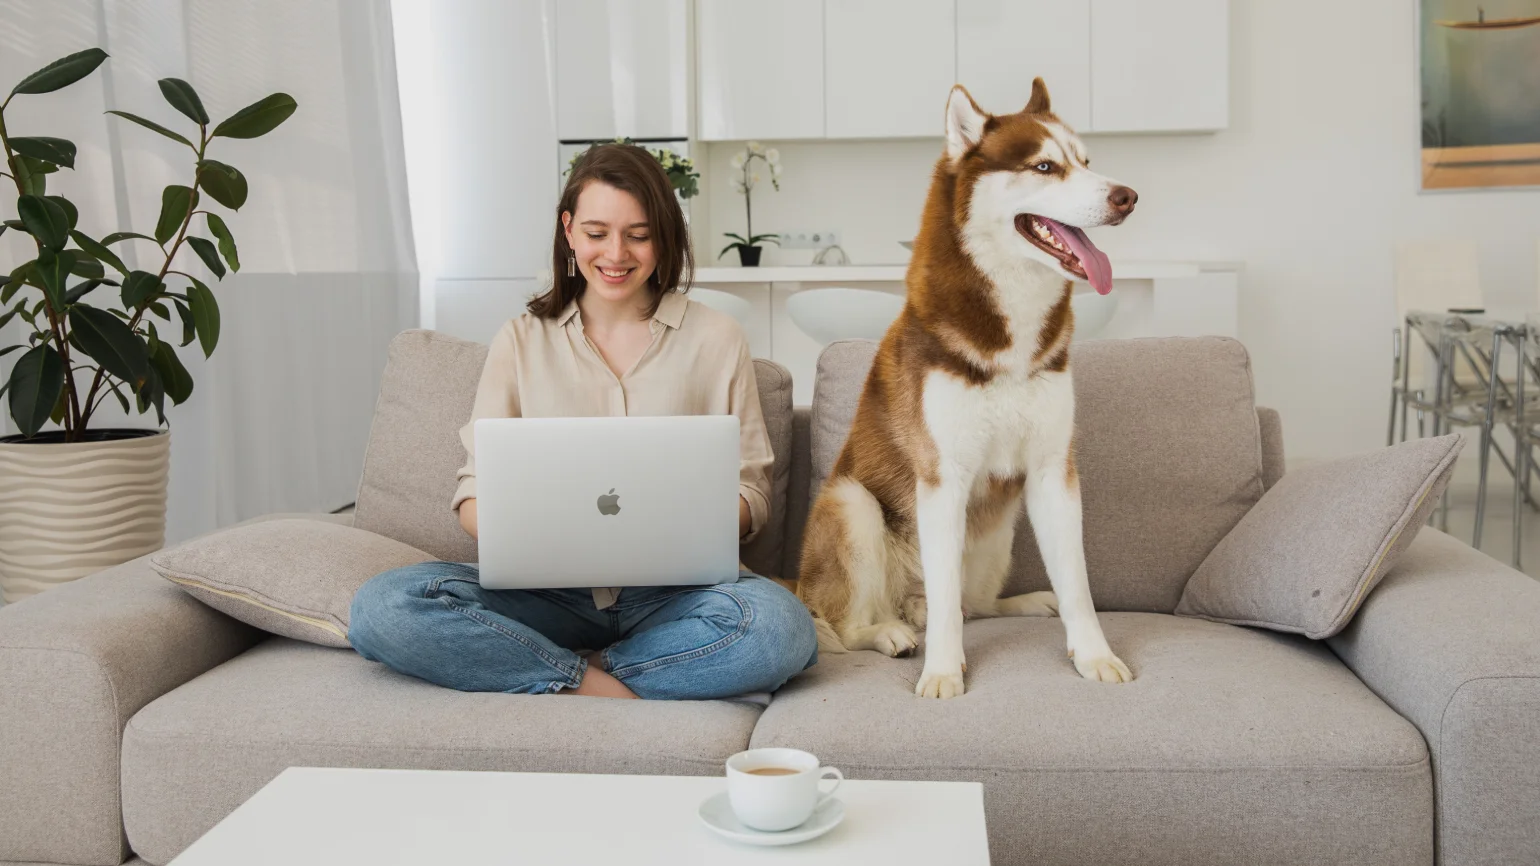 Benefits of dogs in a coworking space